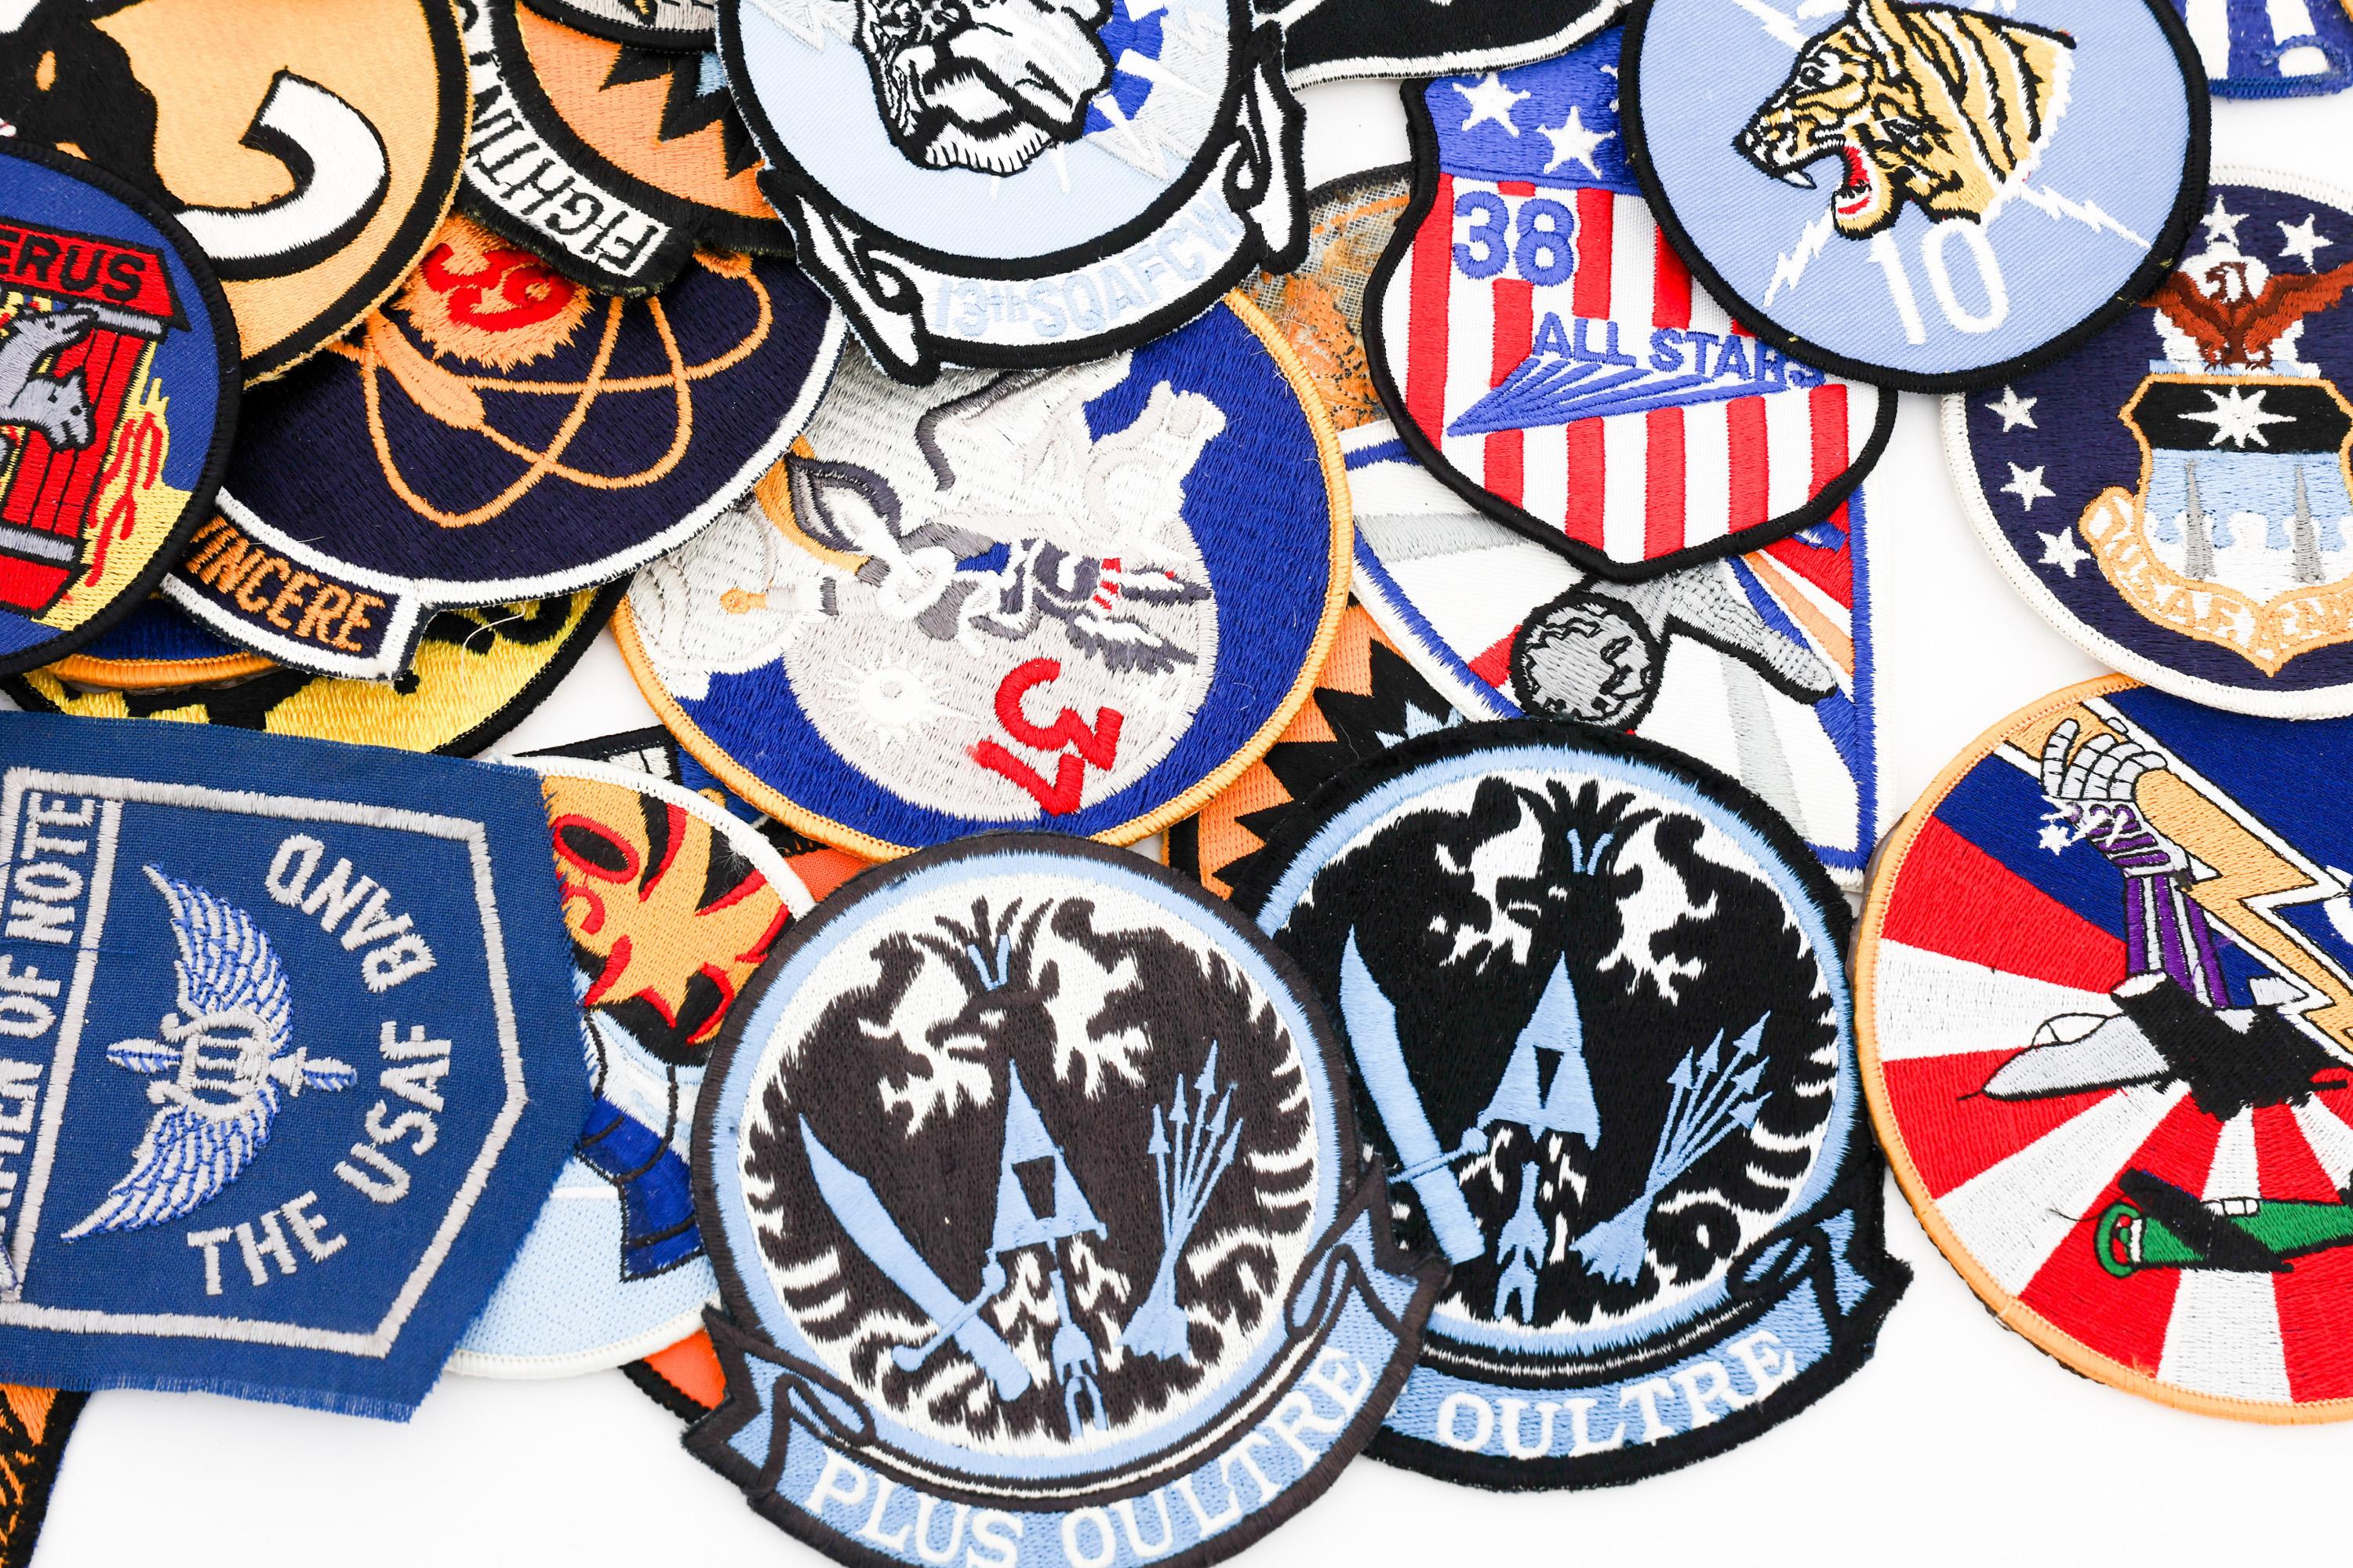 COLD WAR - CURRENT US AIR FORCE SQUADRON PATCHES